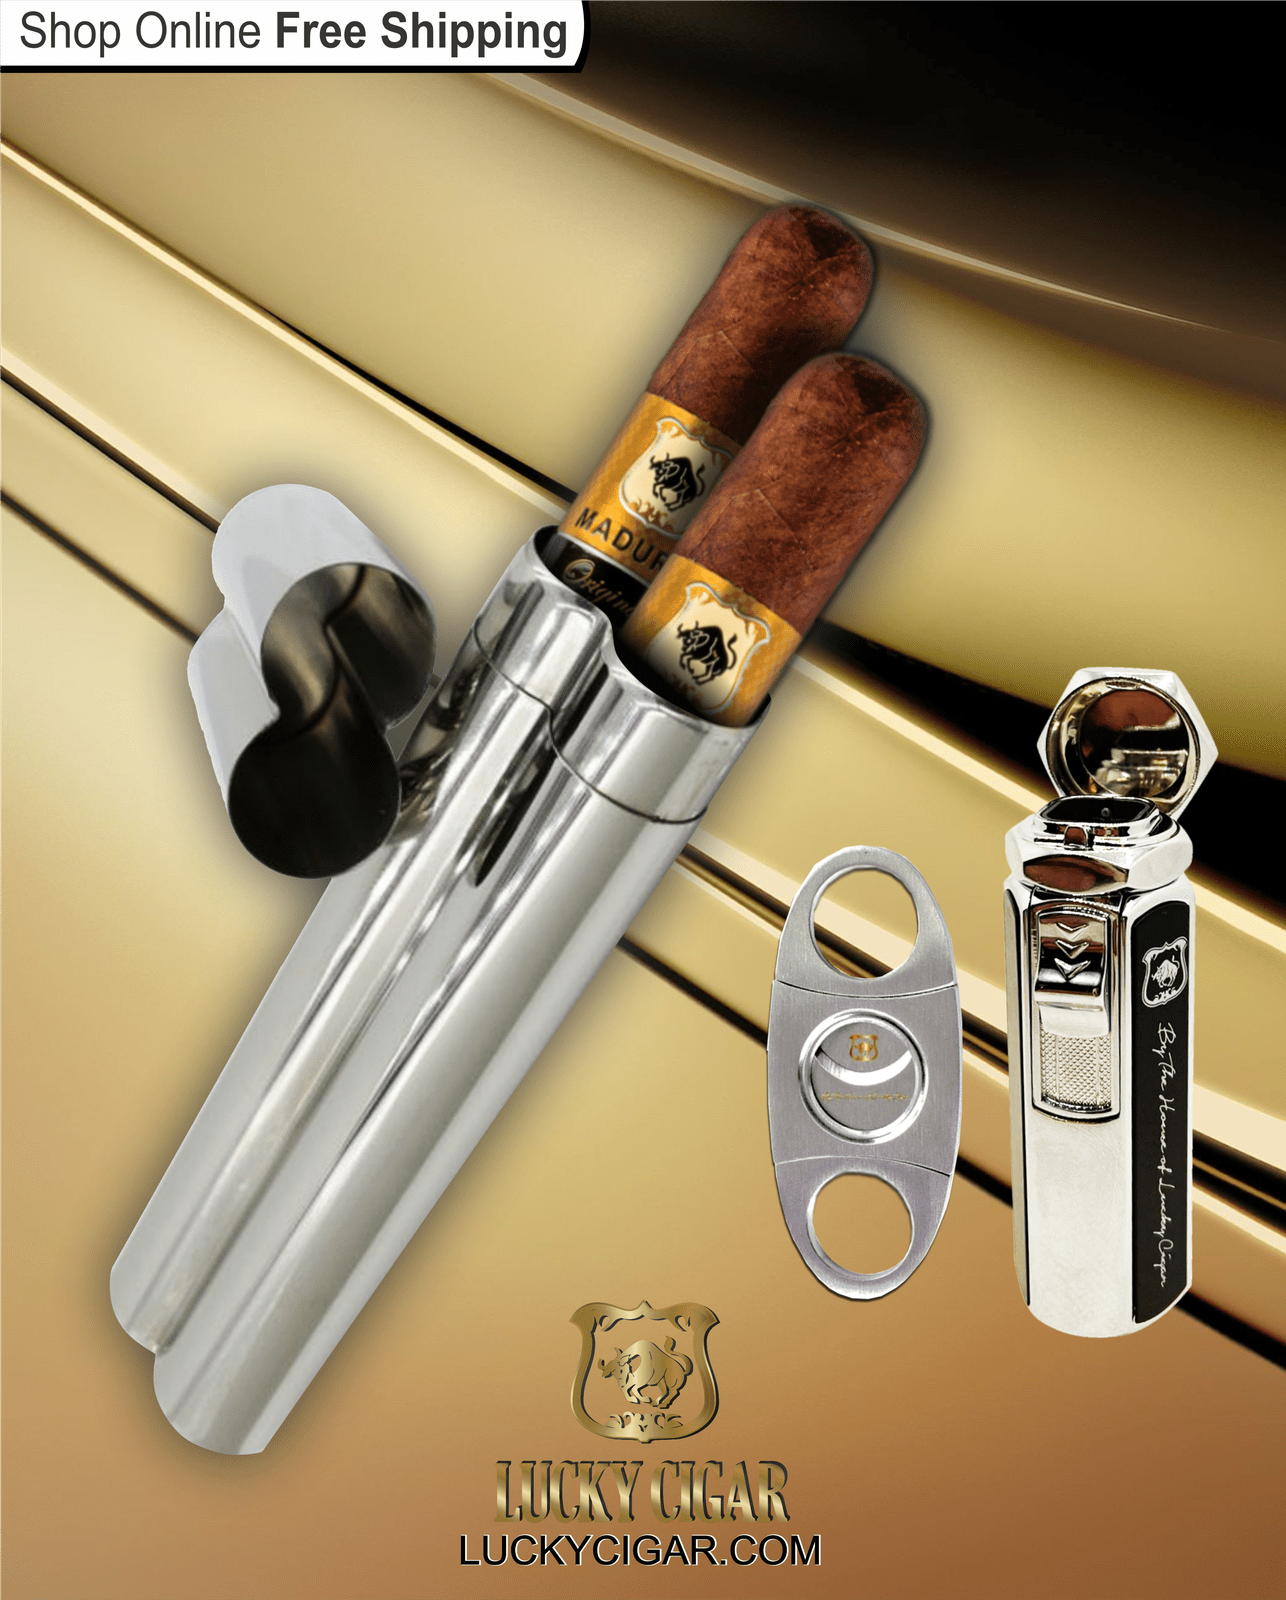 Cigar Lifestyle Accessories: Set of 2 Maduro Cigars with Torch, Cutter, Travel Humidor